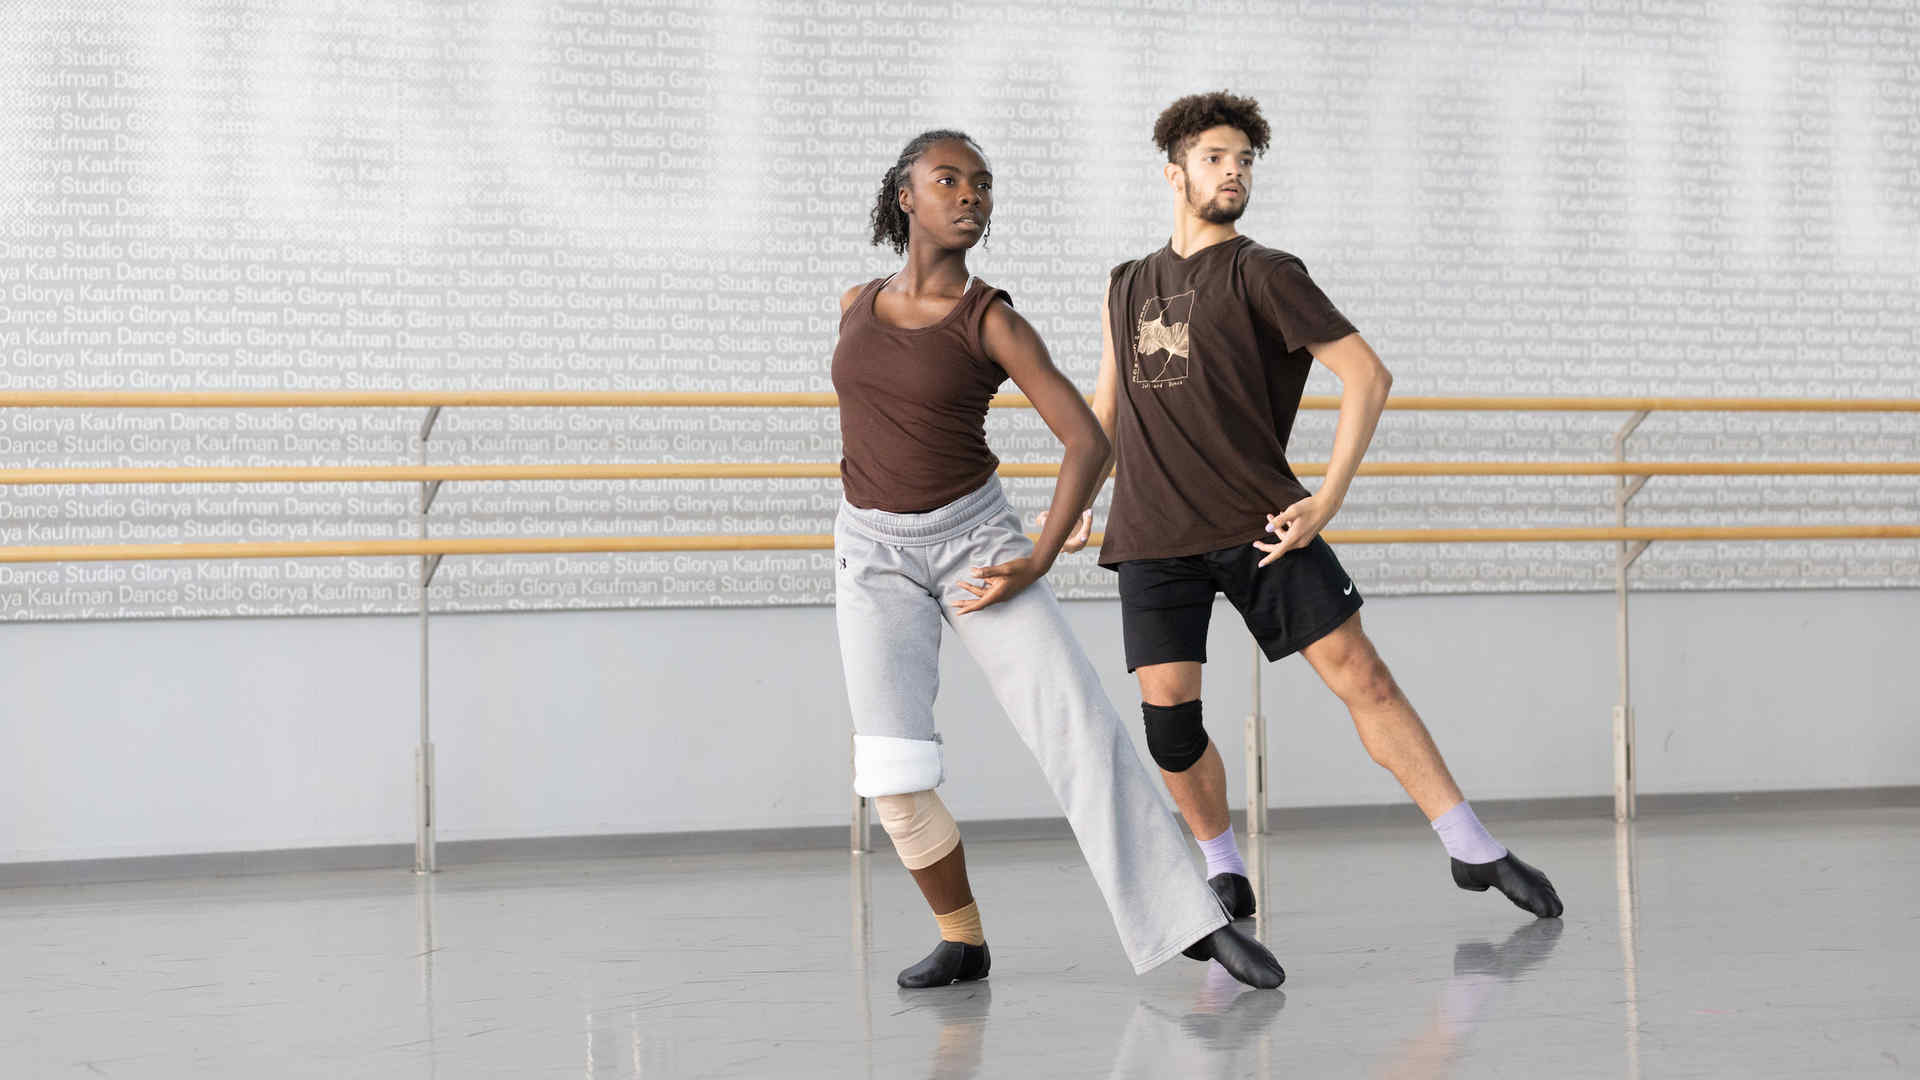 Two dancers in a rehearsal studio practicing